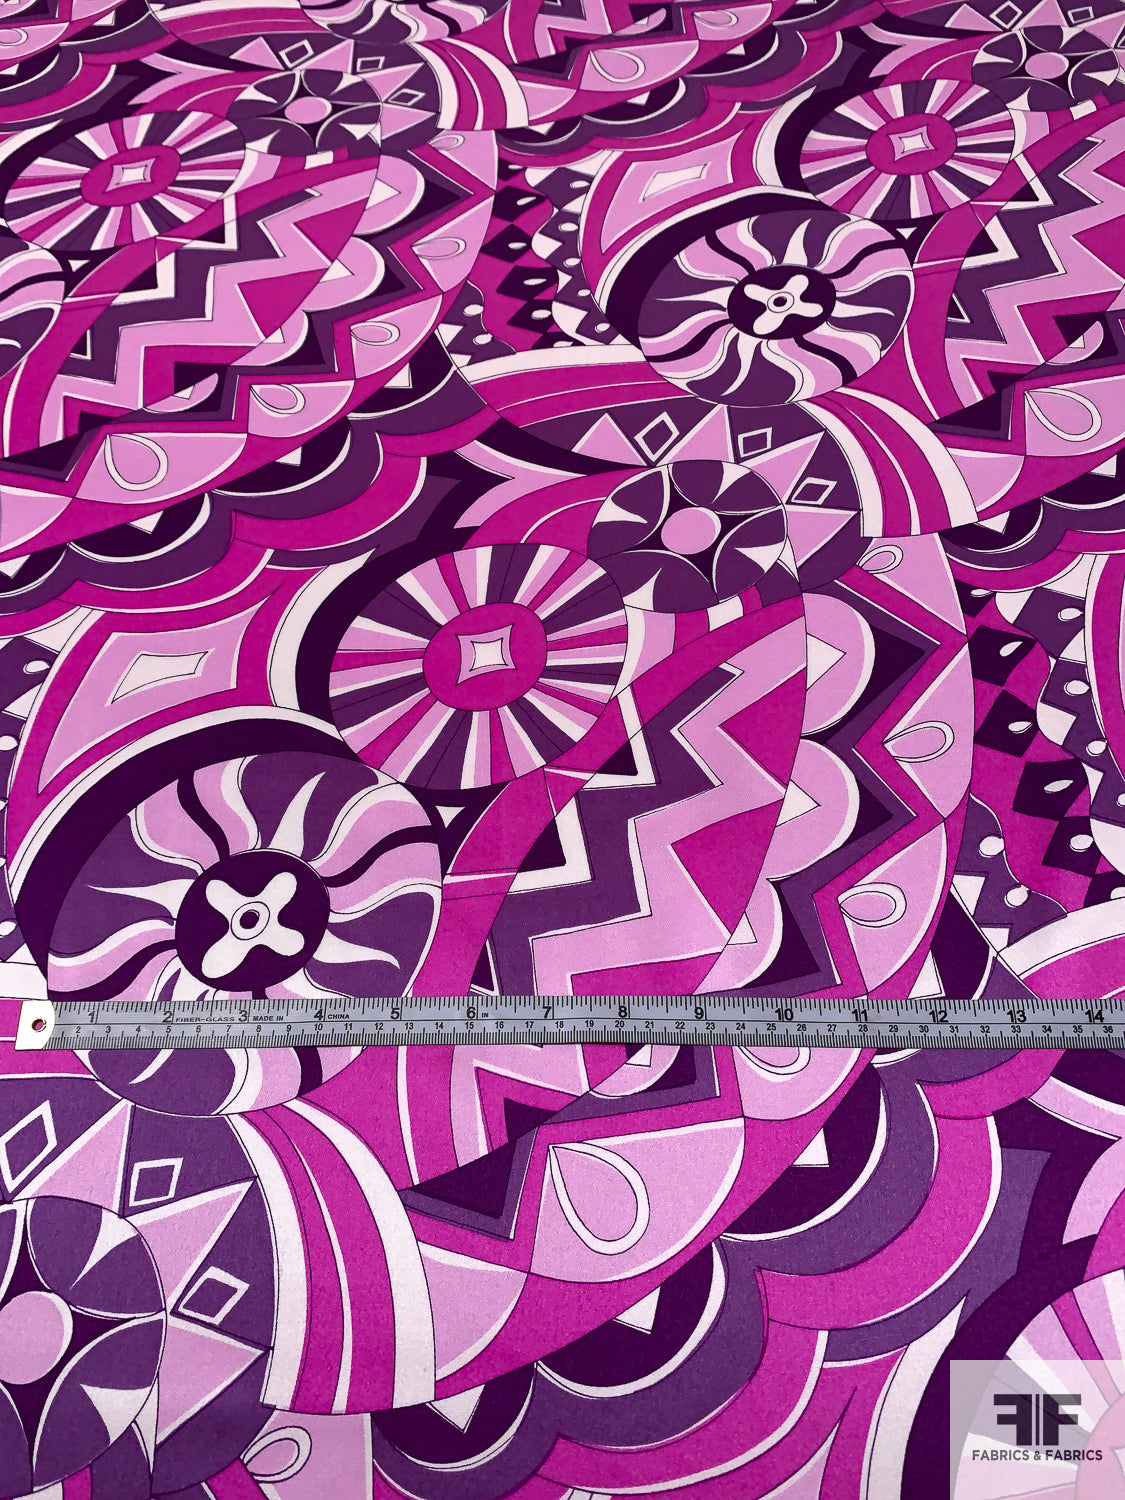 Ethno-Geometric Inspired Printed Silk Charmeuse - Magenta/Orchid